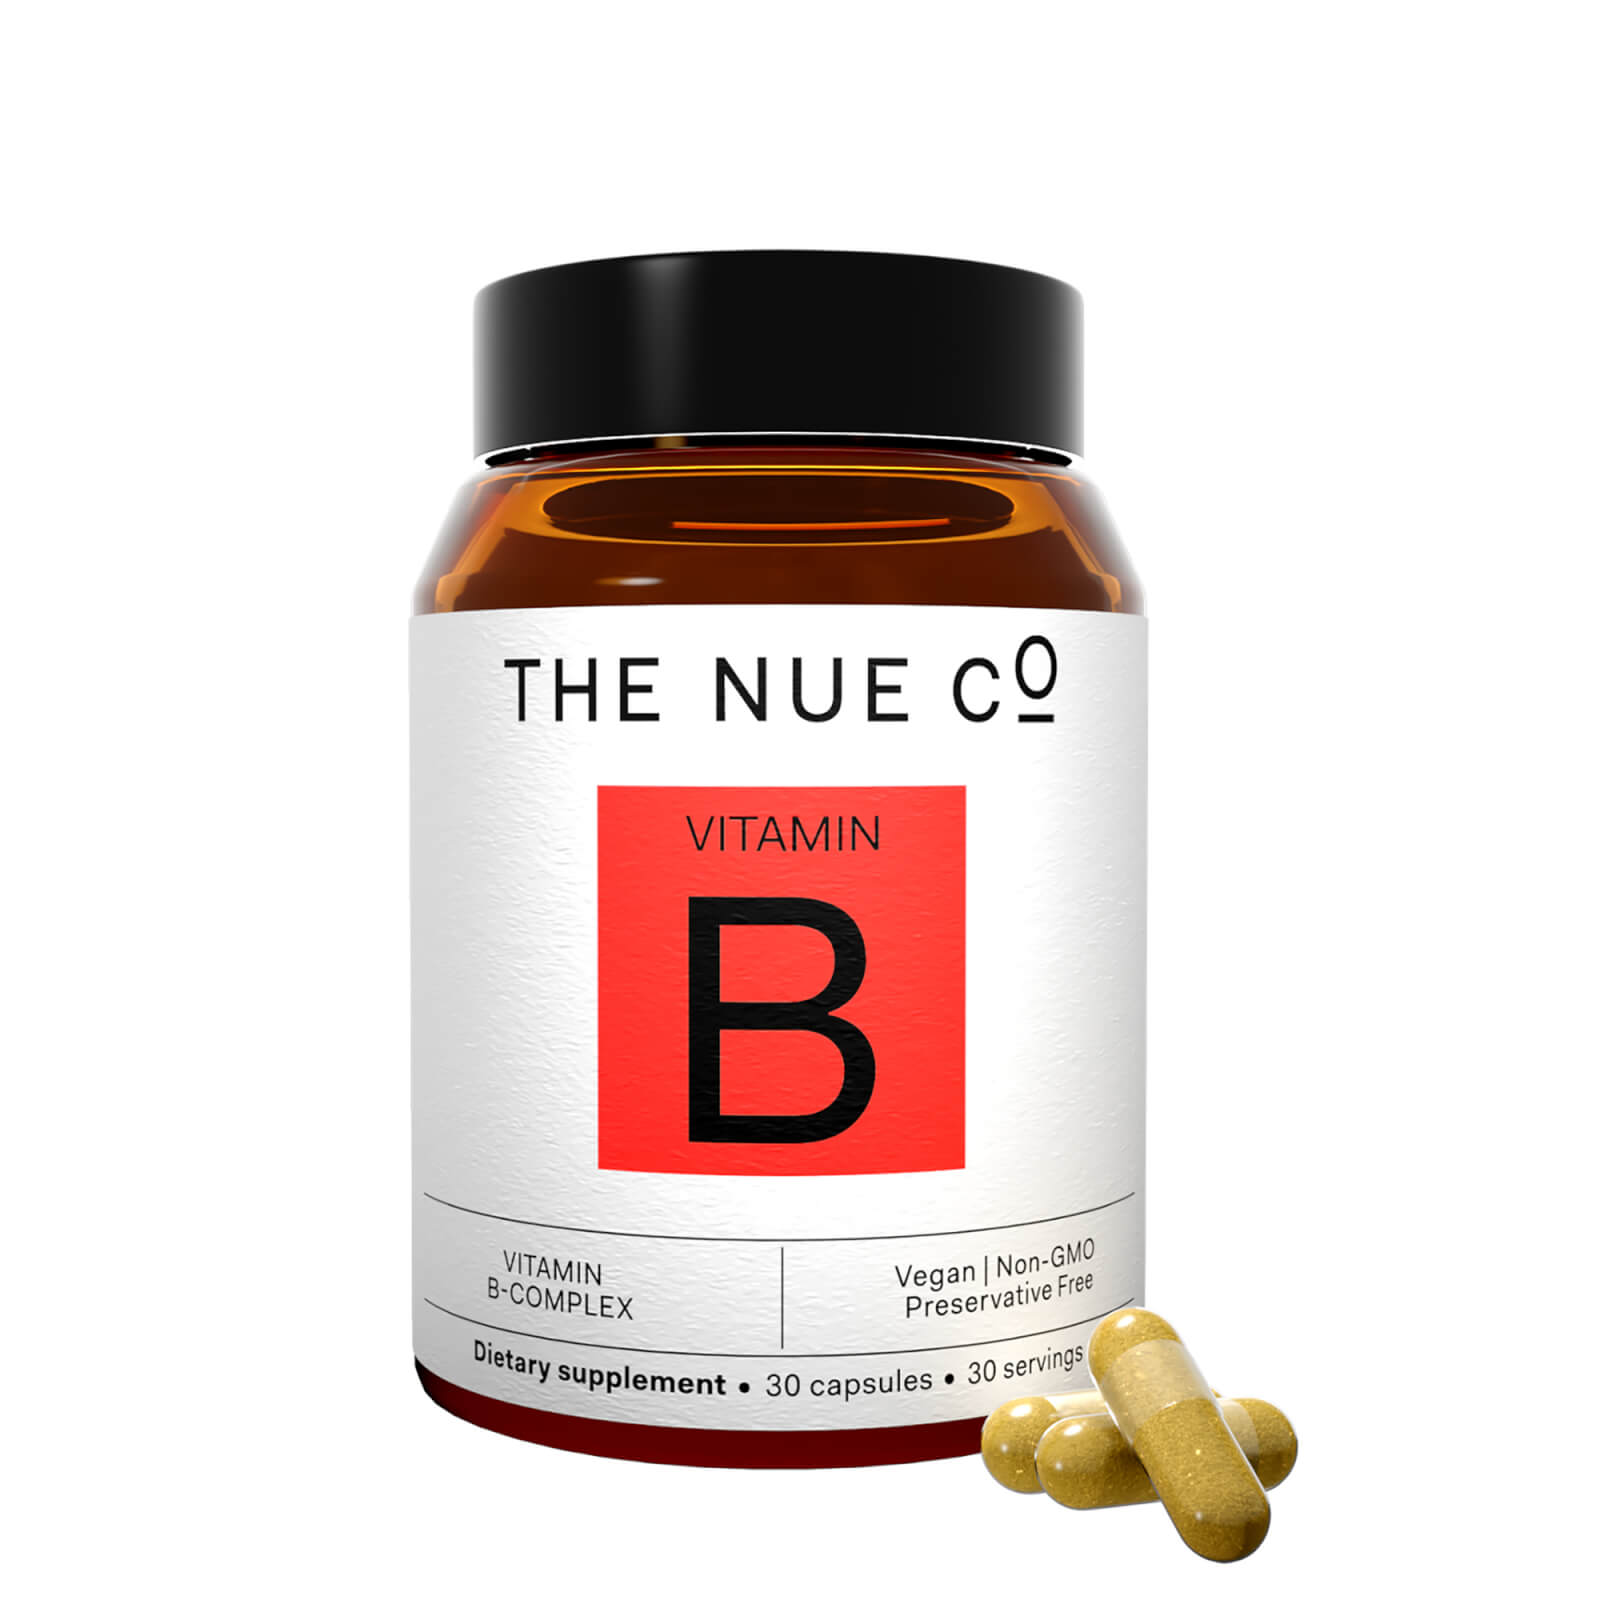 The Nue Co. Vitamin B Supplement To Improve Energy (30 Capsules)